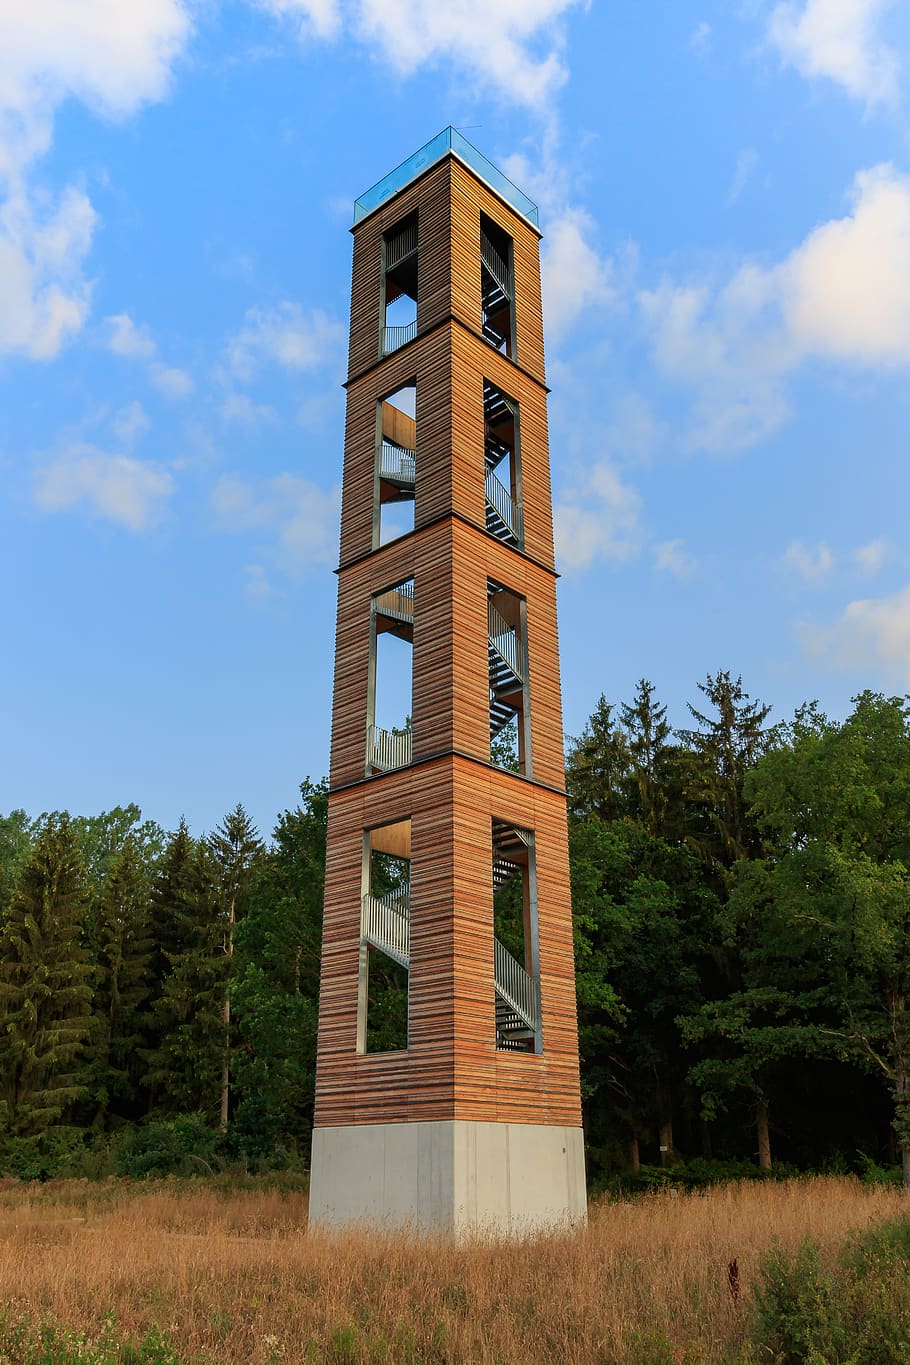 observation tower, tower, bannwald, spell forest tower, pfrunger castle hamlets of ried, reed, nature conservation, landscape protection, architecture, view